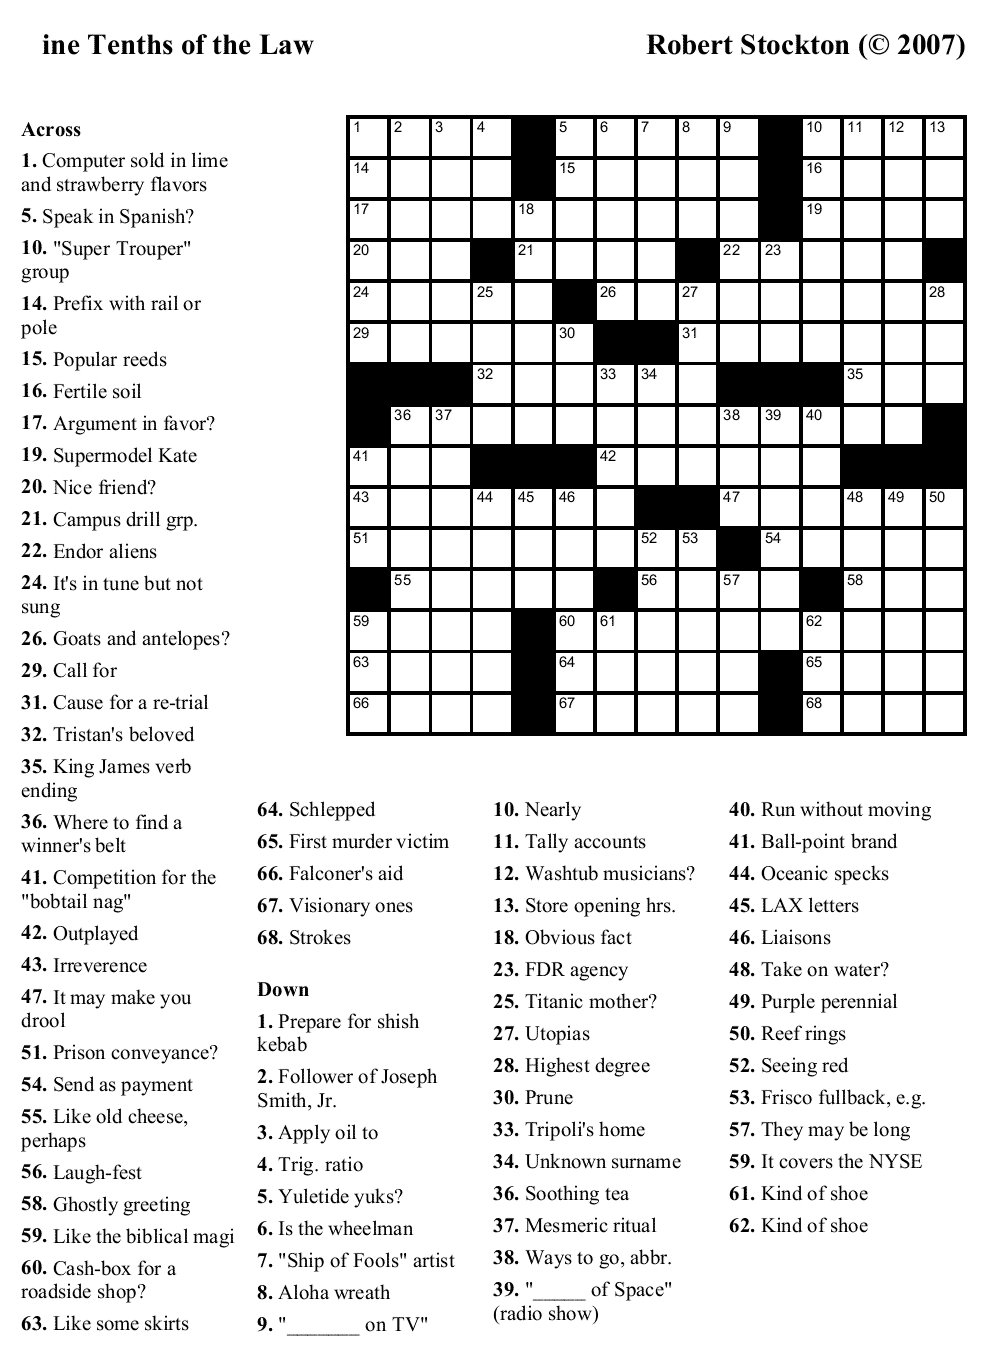 Crossword Puzzles Printable - Yahoo Image Search Results | Crossword - Crossword Puzzle Games Printable